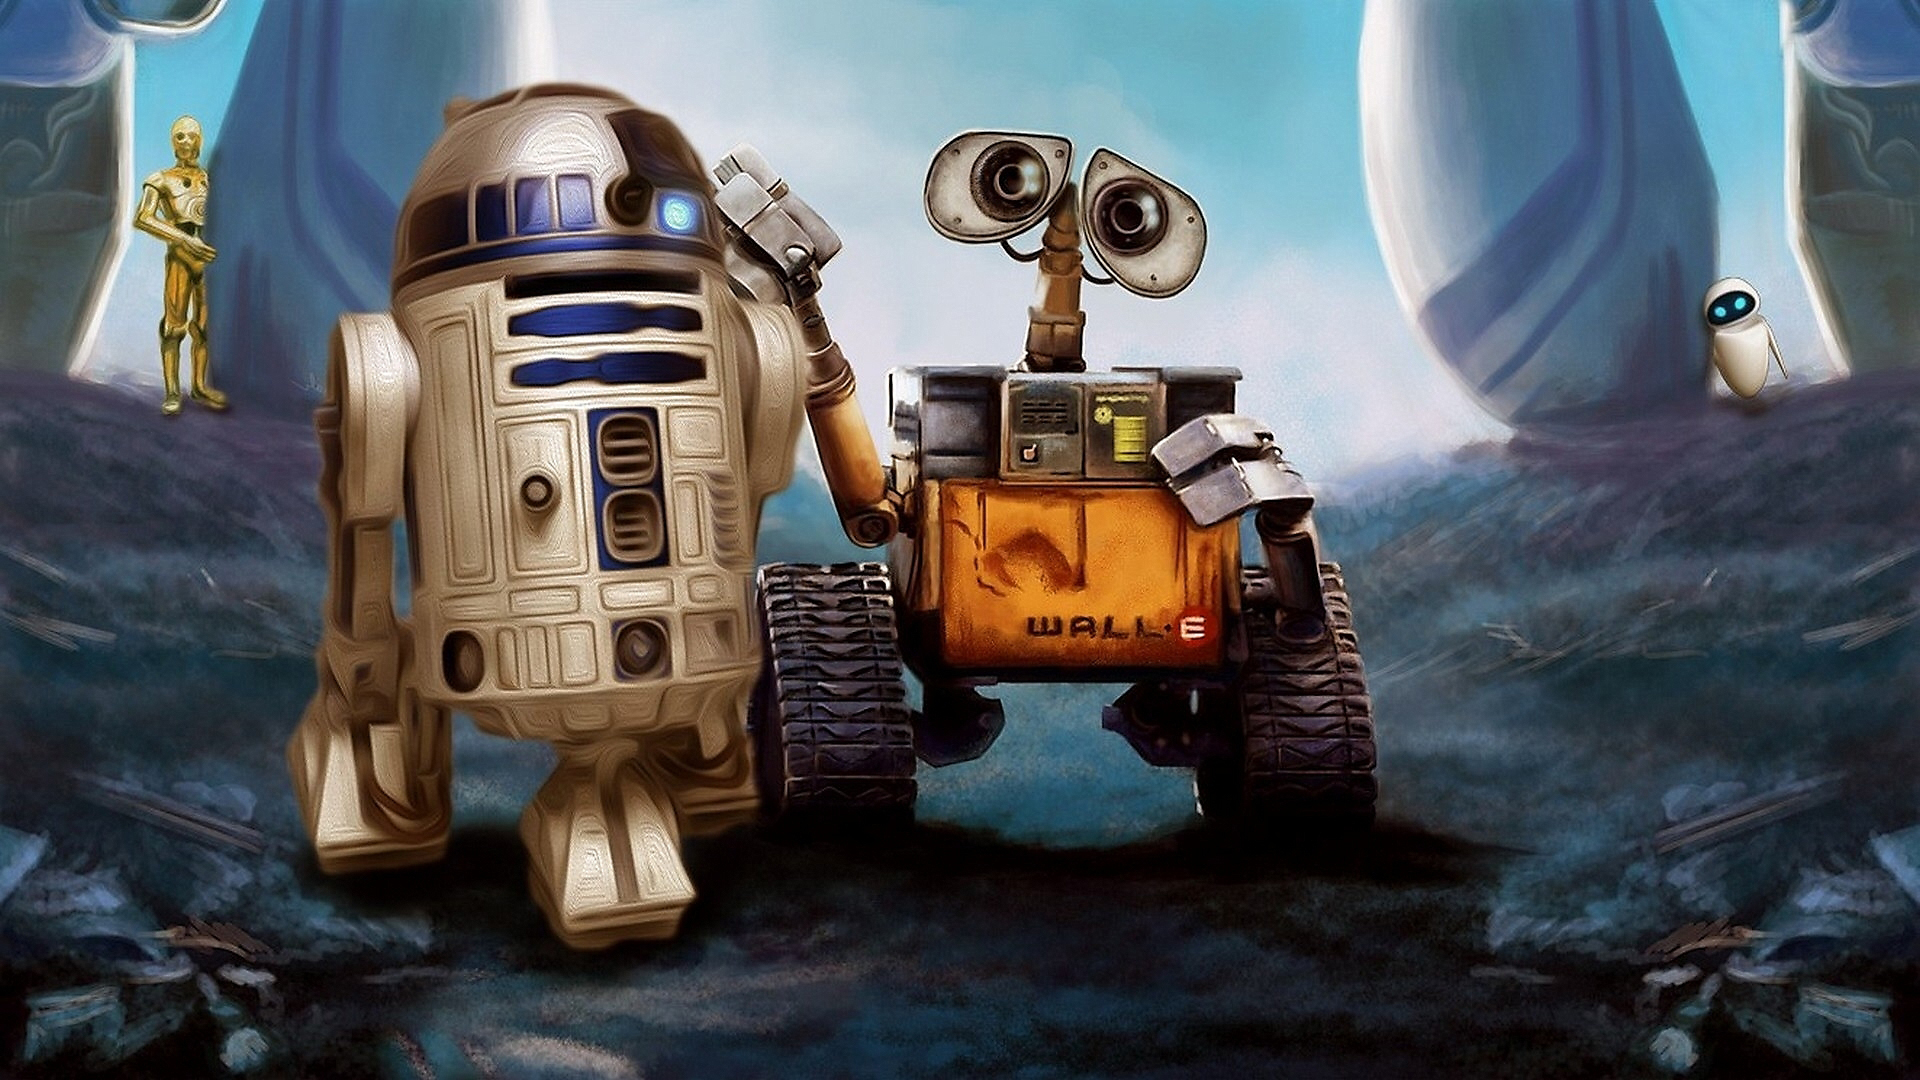 wall·e (character), r2 d2, movie, crossover